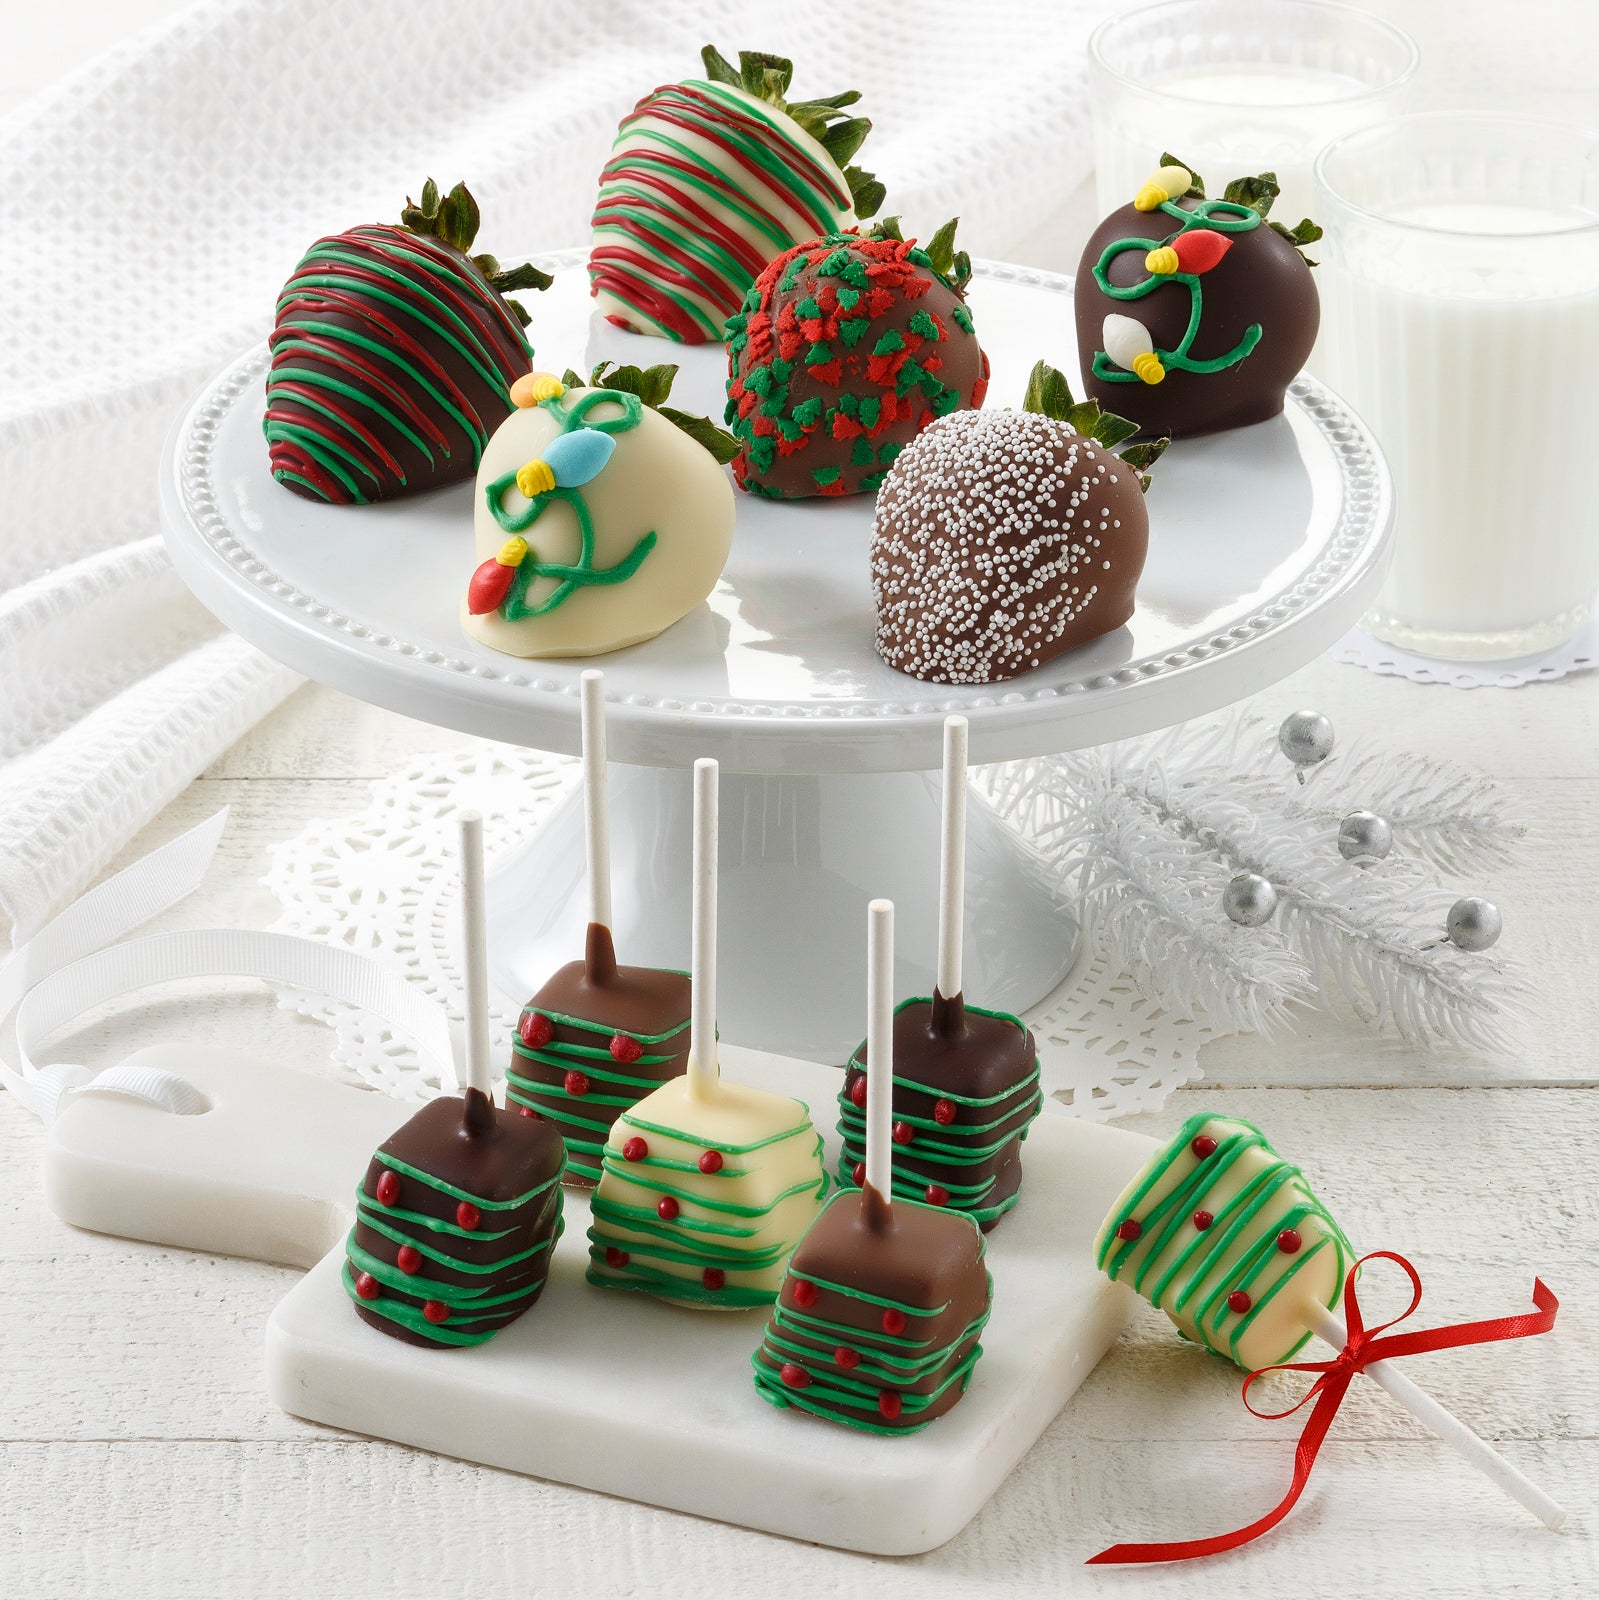 Six chocolate-covered strawberries and six chocolate covered cheesecake pops that are all decorated in a holiday theme